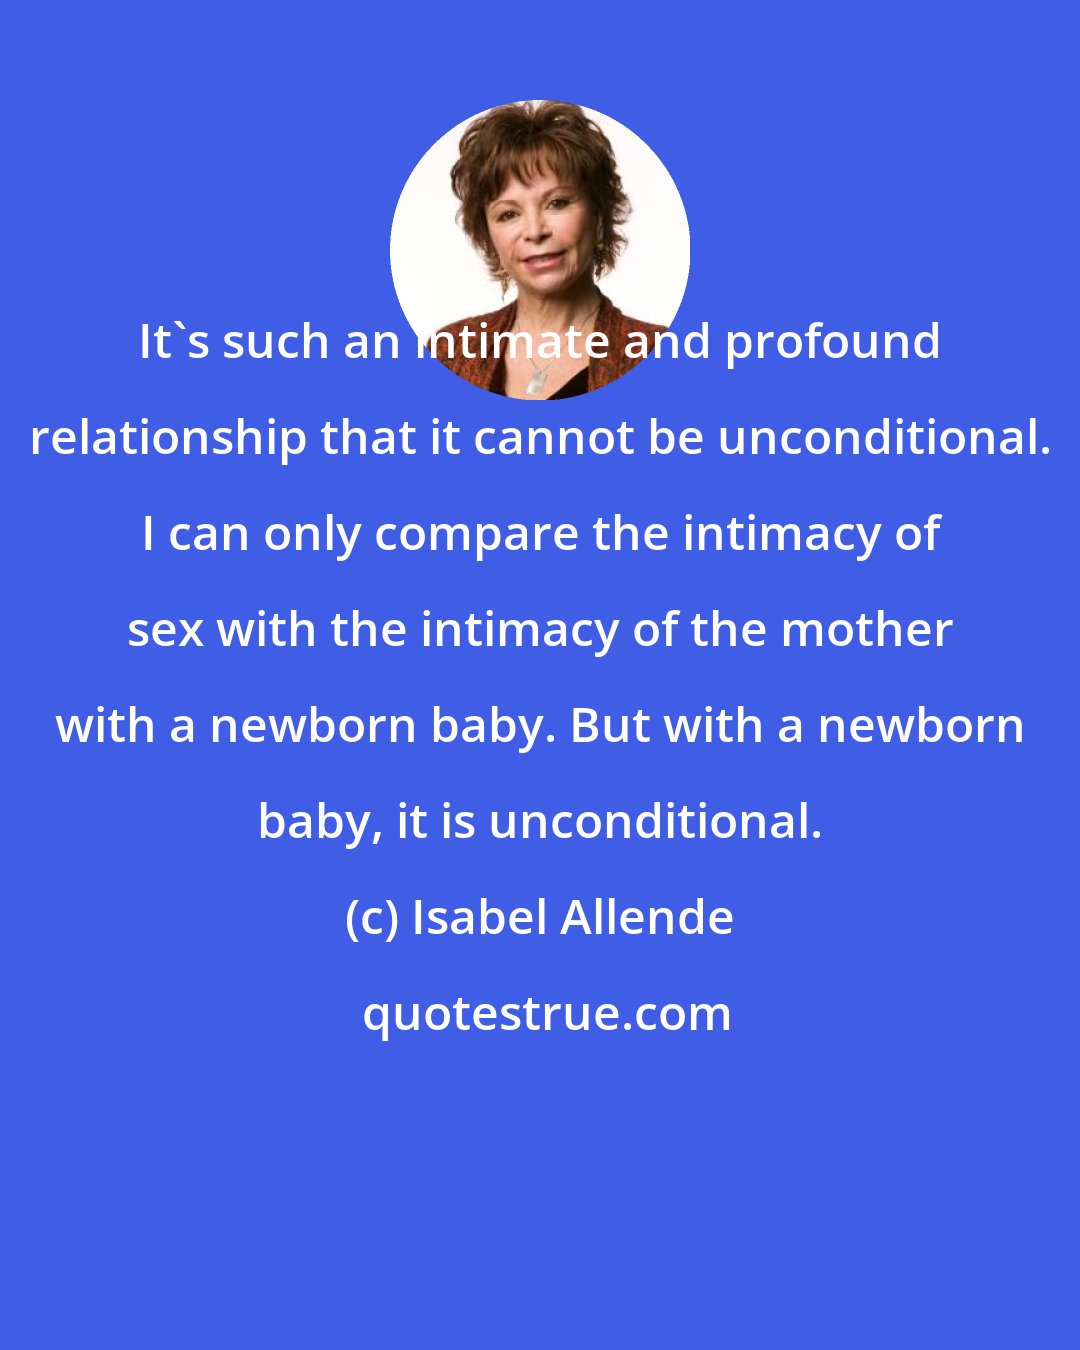 Isabel Allende: It's such an intimate and profound relationship that it cannot be unconditional. I can only compare the intimacy of sex with the intimacy of the mother with a newborn baby. But with a newborn baby, it is unconditional.